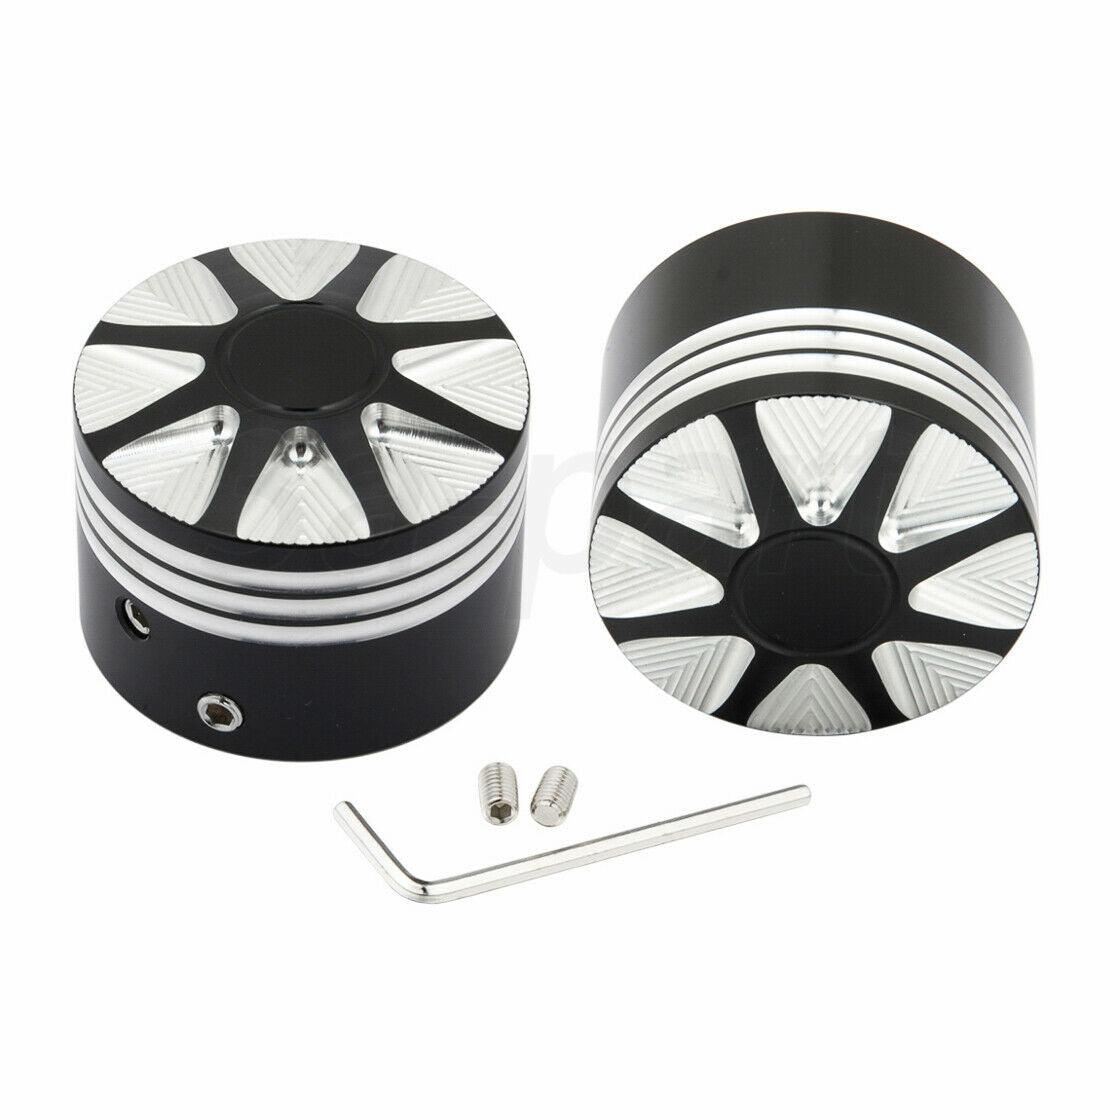 2 PCS Front Black Axle Caps Nut Covers Fit for Harley Touring Street Tri Glide - Moto Life Products